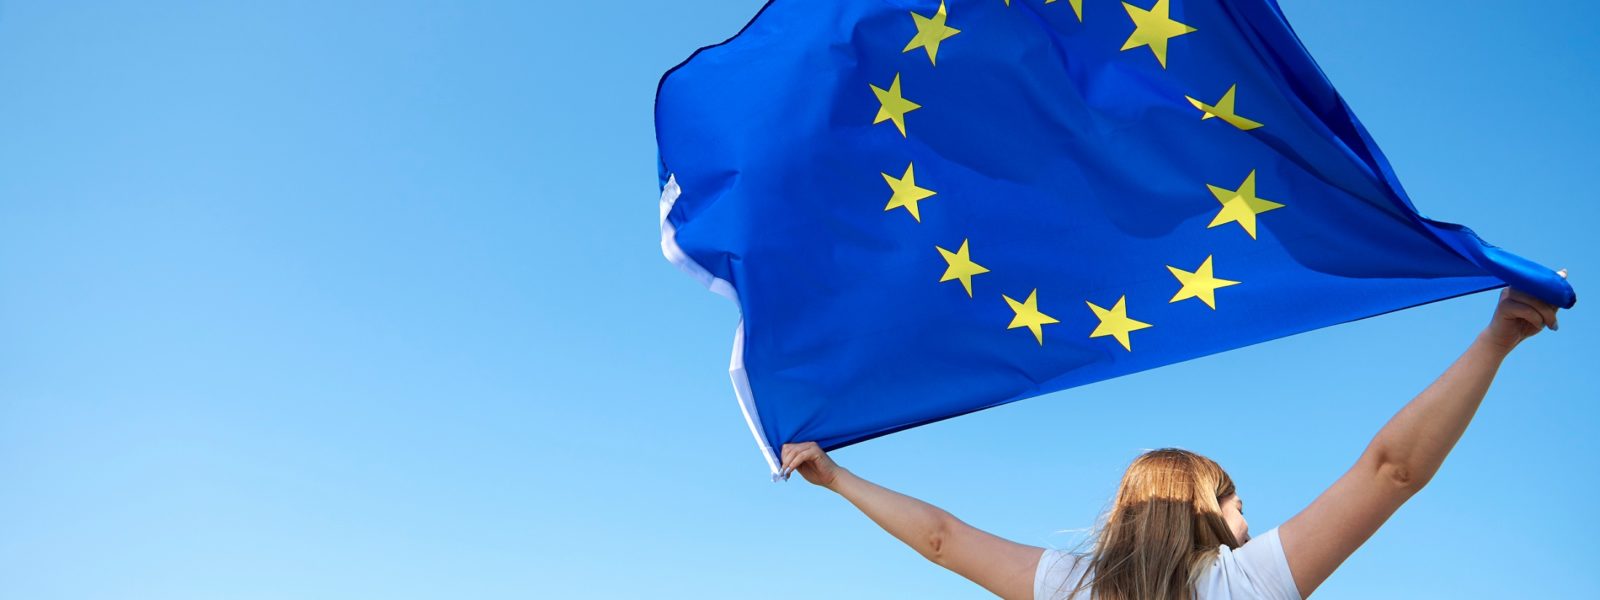 AdobeStock_286829740_Rear view of young woman waving the European Union flag